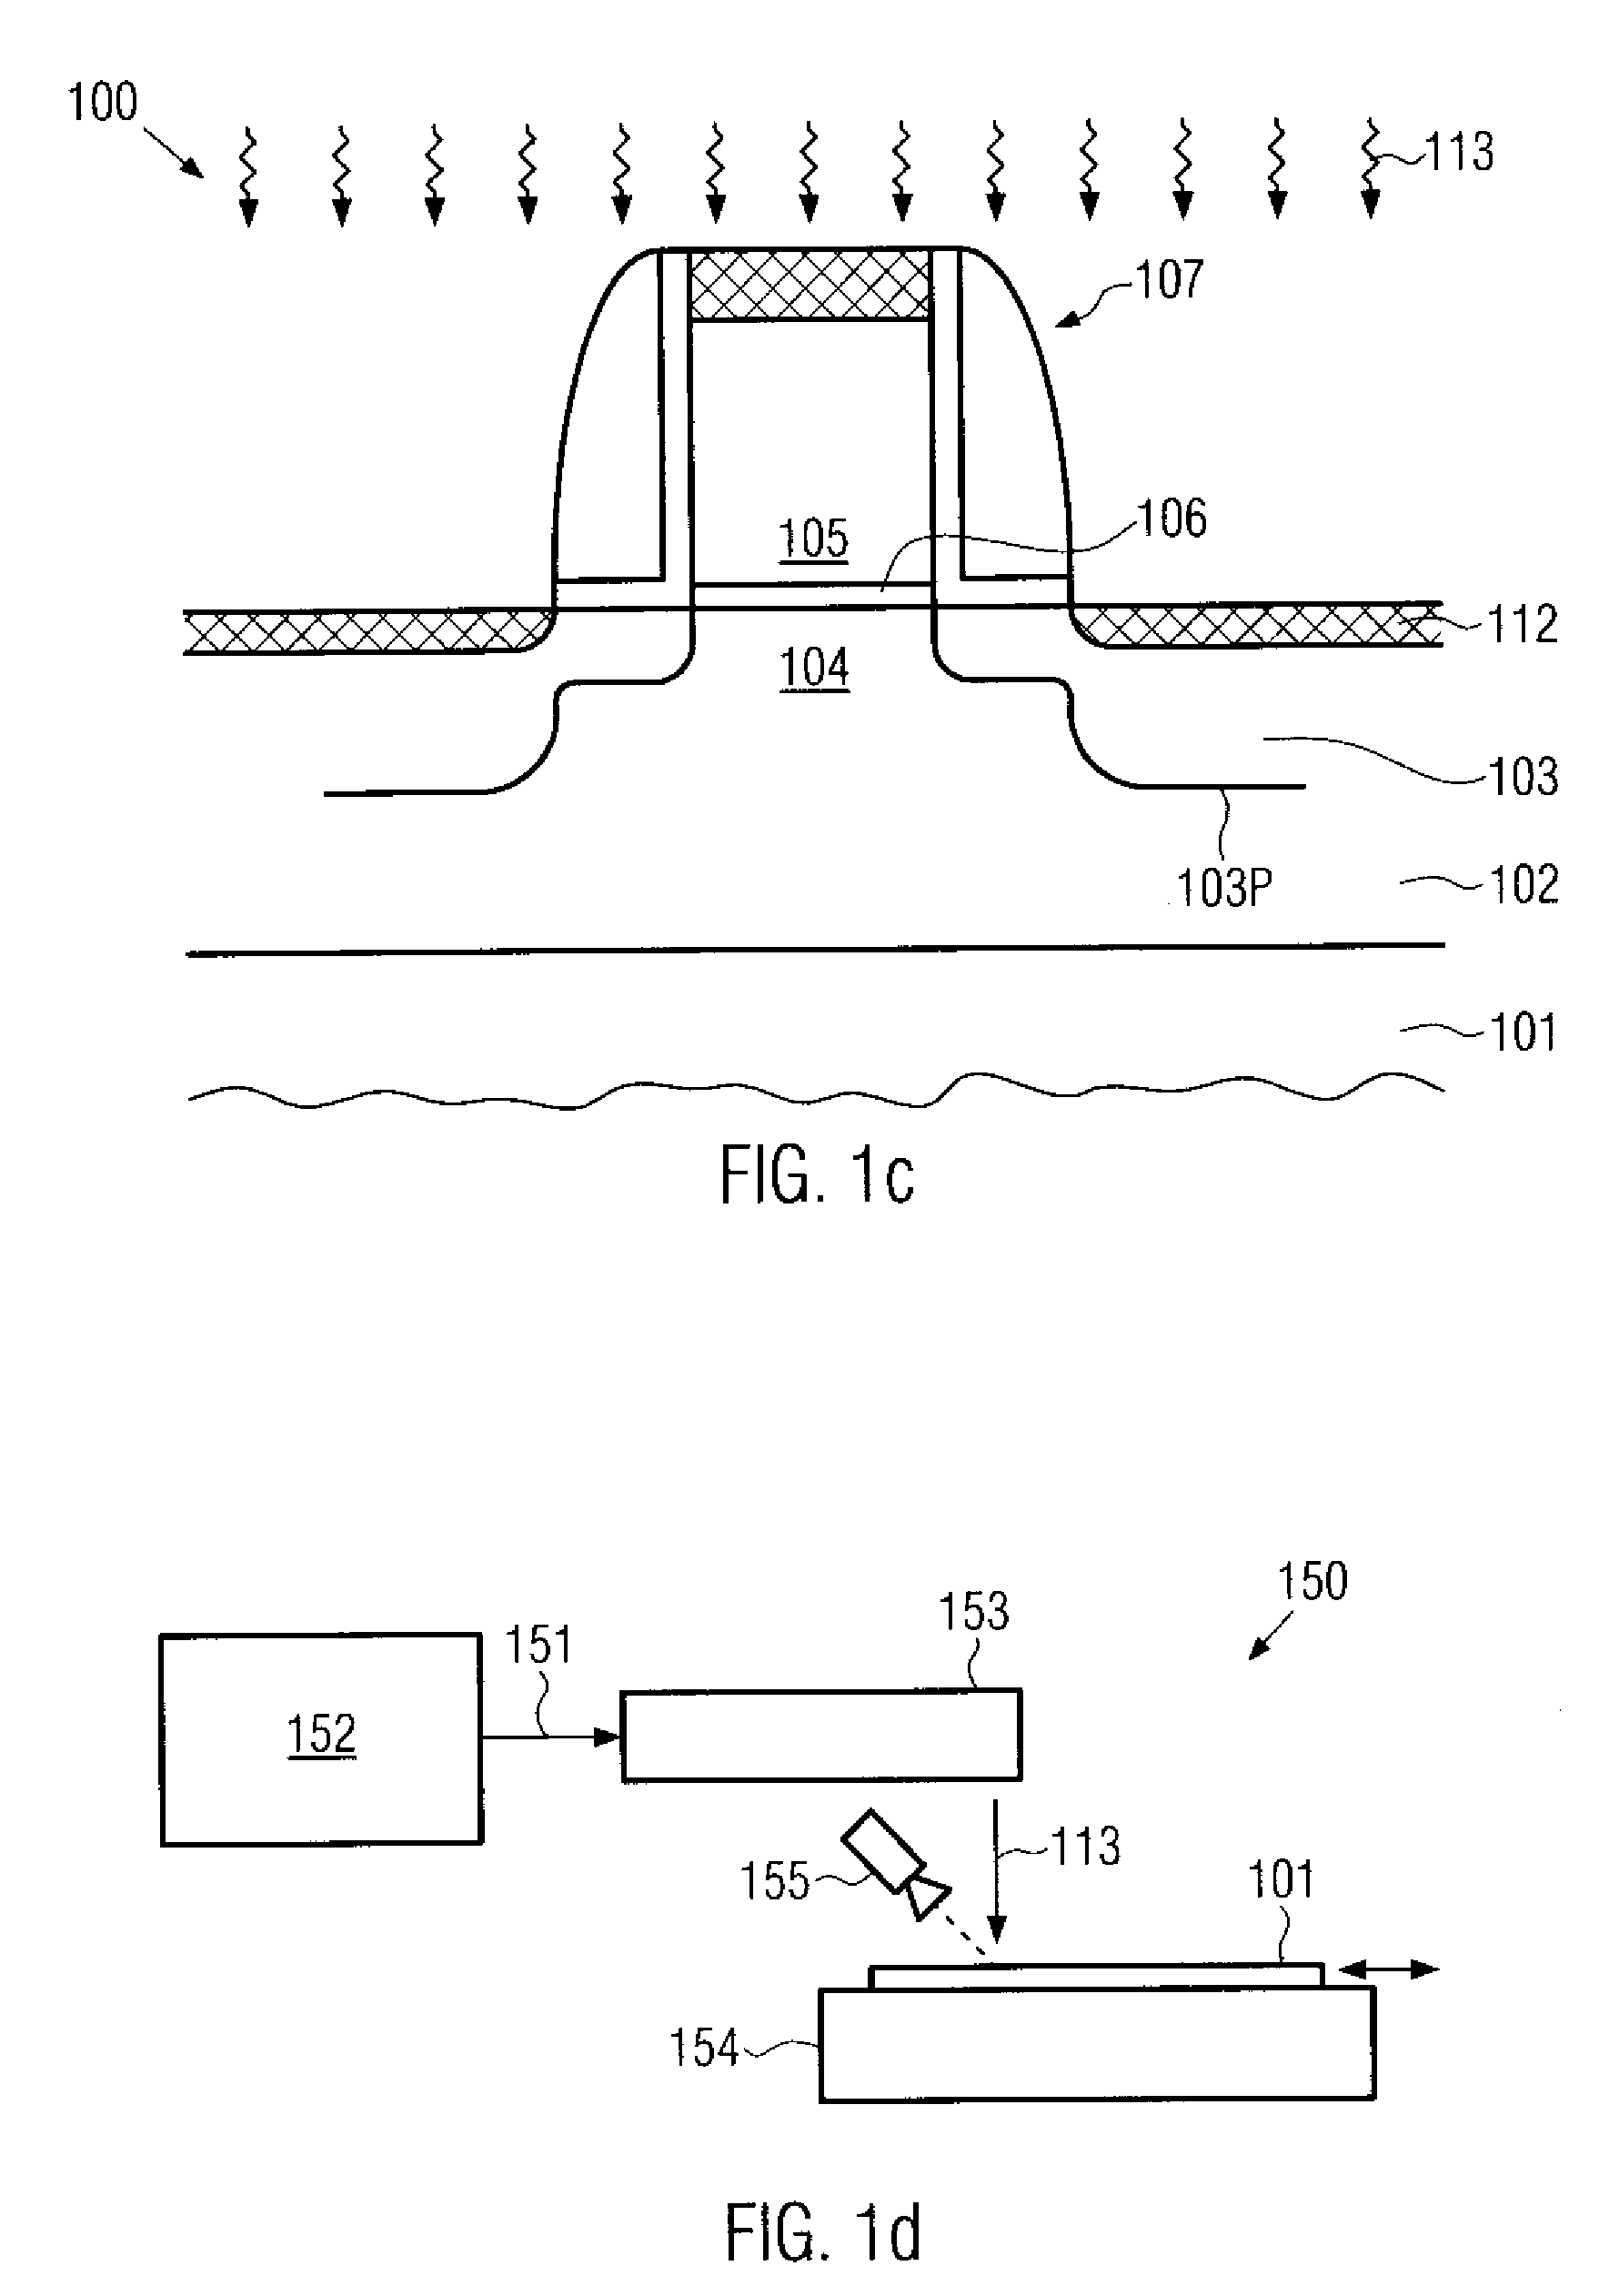 Method of increasing transistor performance by dopant activation after silicidation